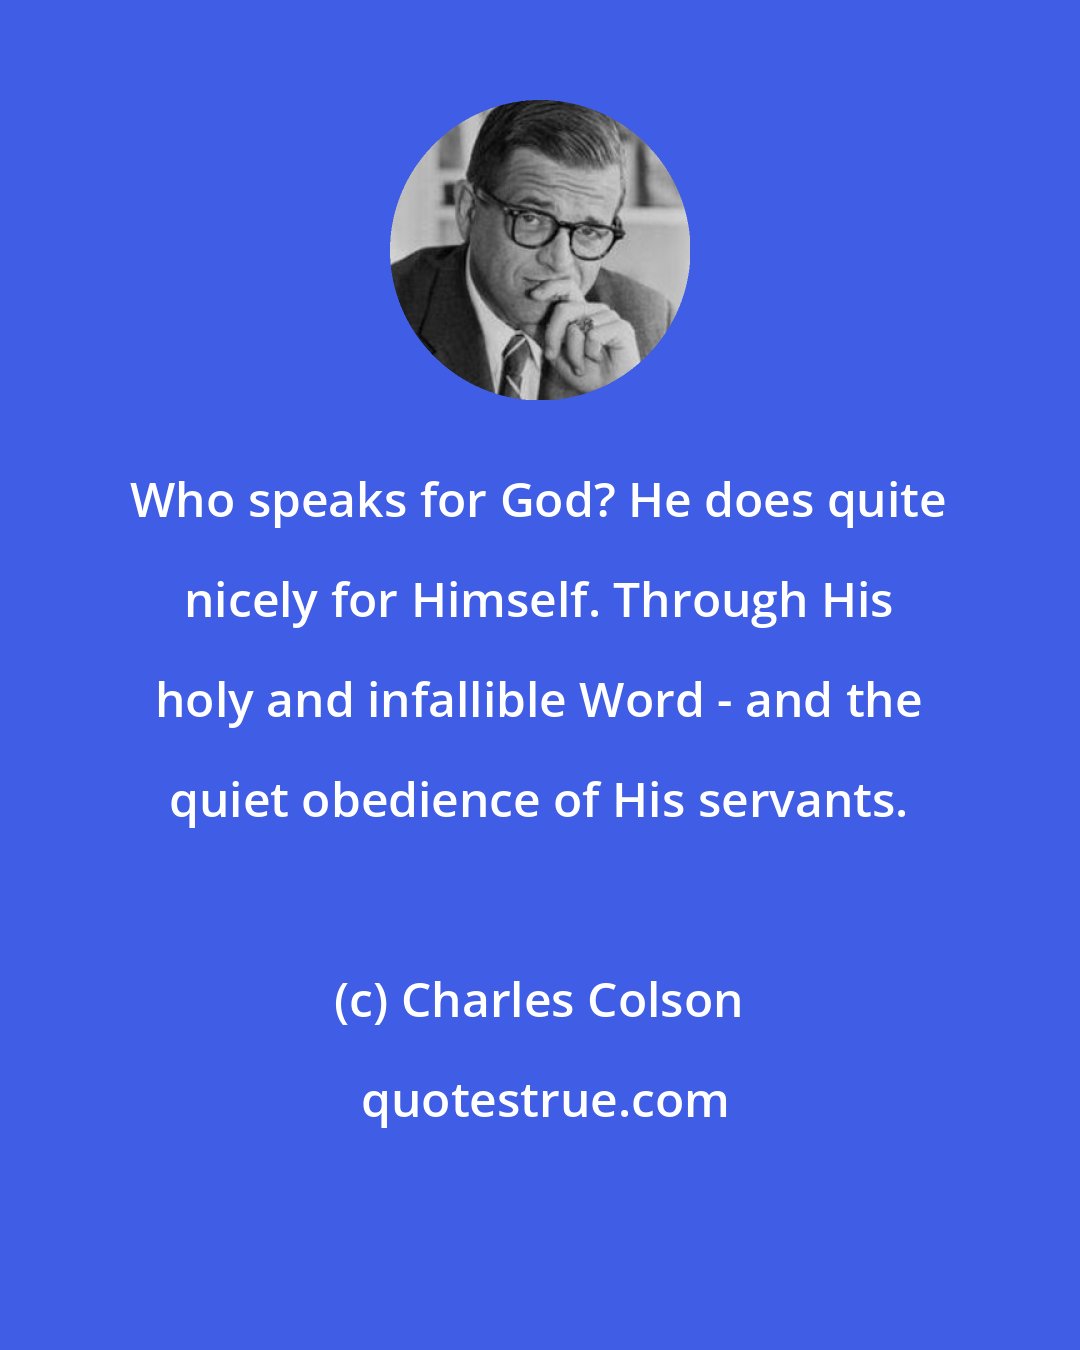 Charles Colson: Who speaks for God? He does quite nicely for Himself. Through His holy and infallible Word - and the quiet obedience of His servants.